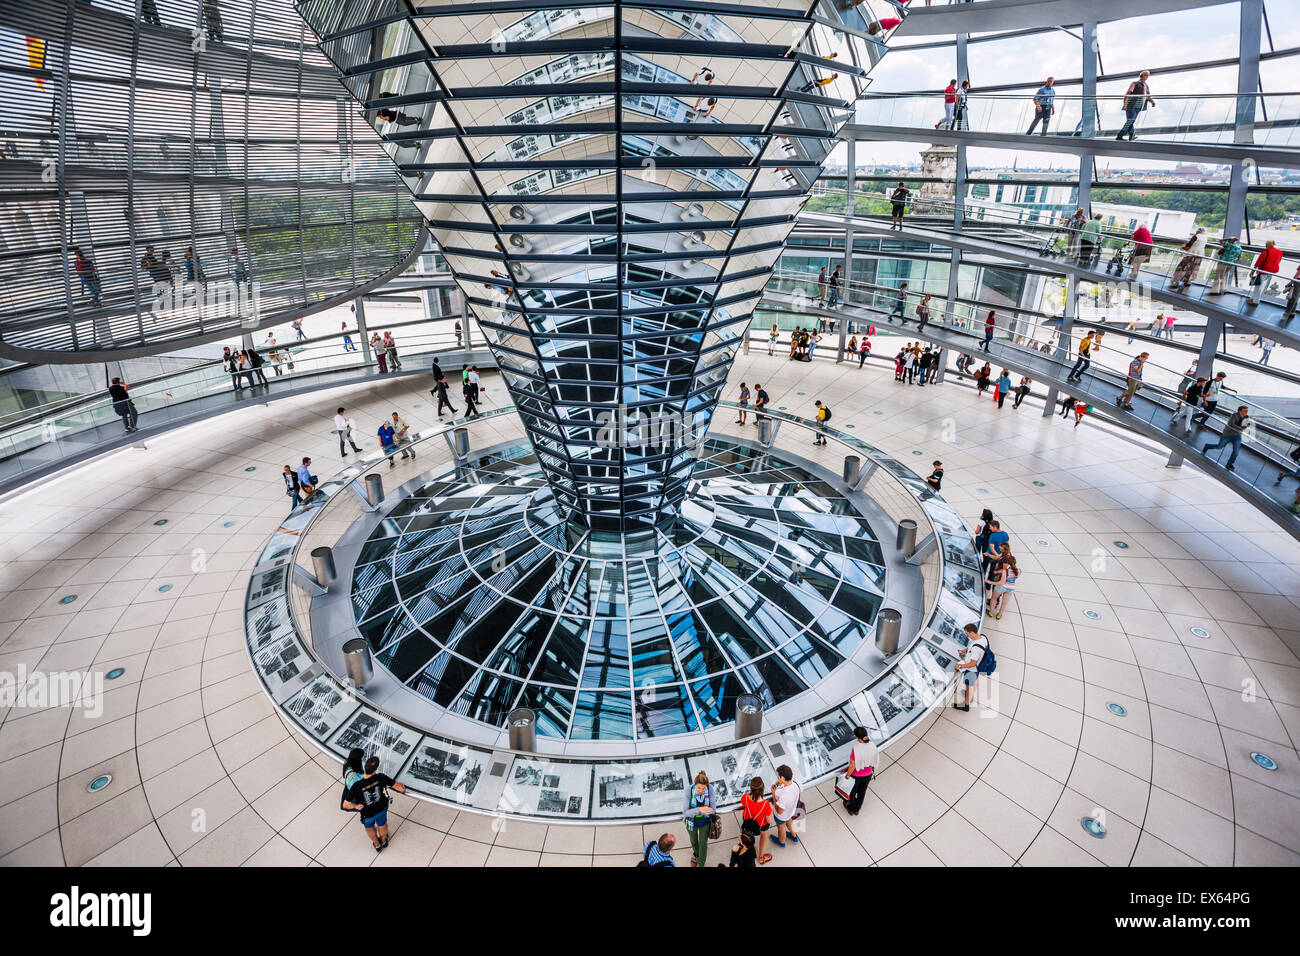 Germany, Berlin, Reichstag building, interior view of glas dome designed by Norman Foster with double-helix spiral ramps Stock Photo